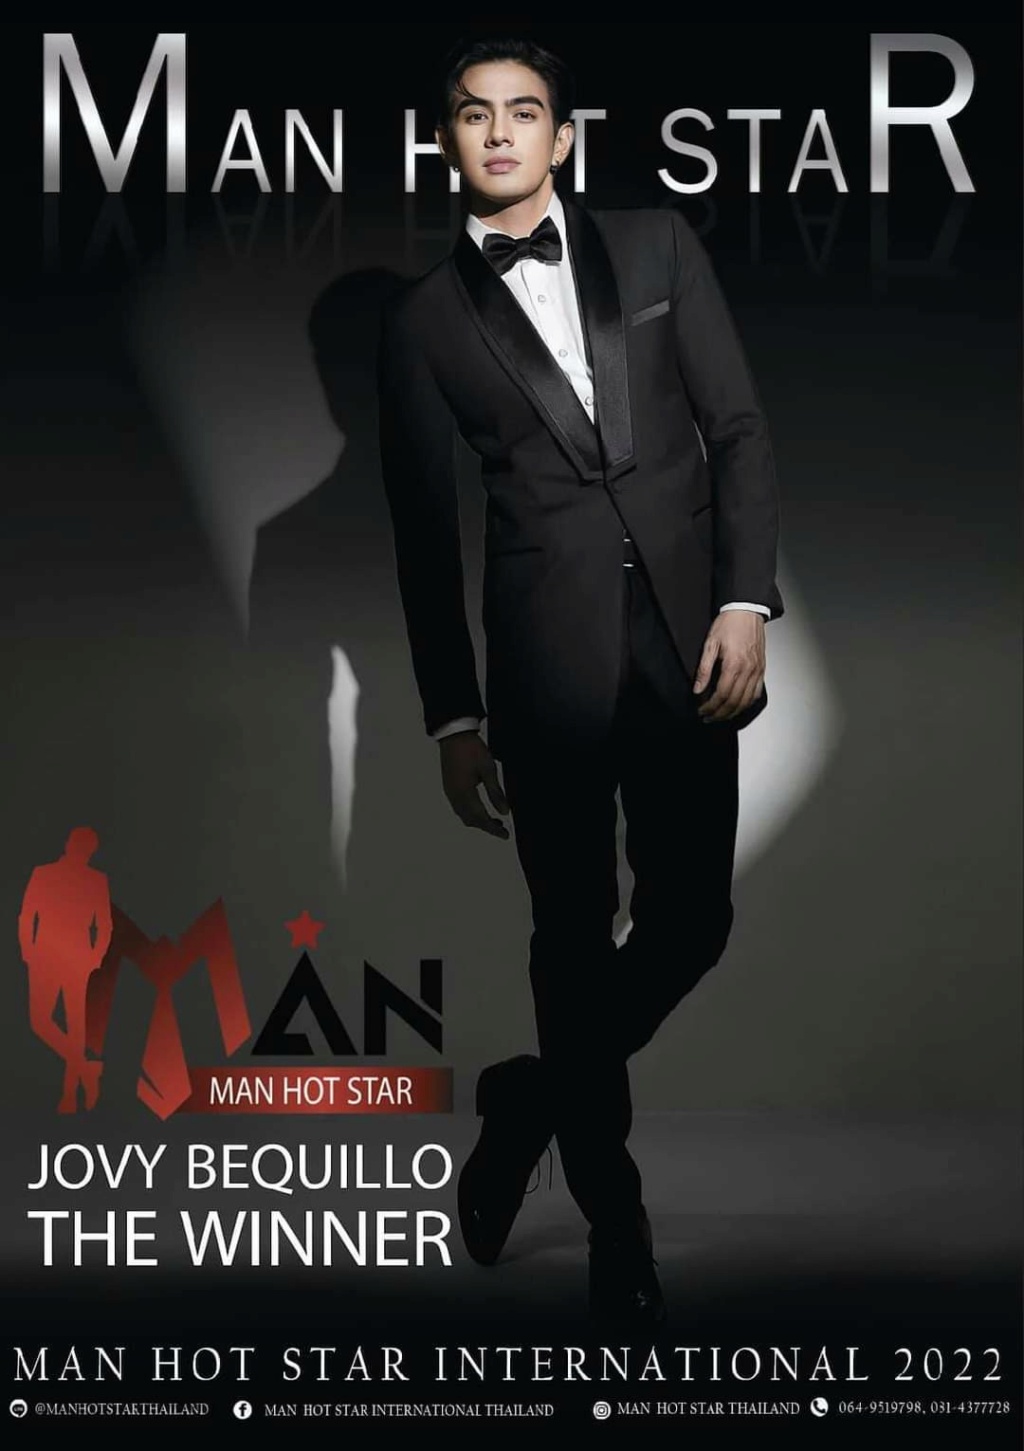 Man Hot Star International 2022 is Jovy Bequillo of the Philippines' Fb_25108